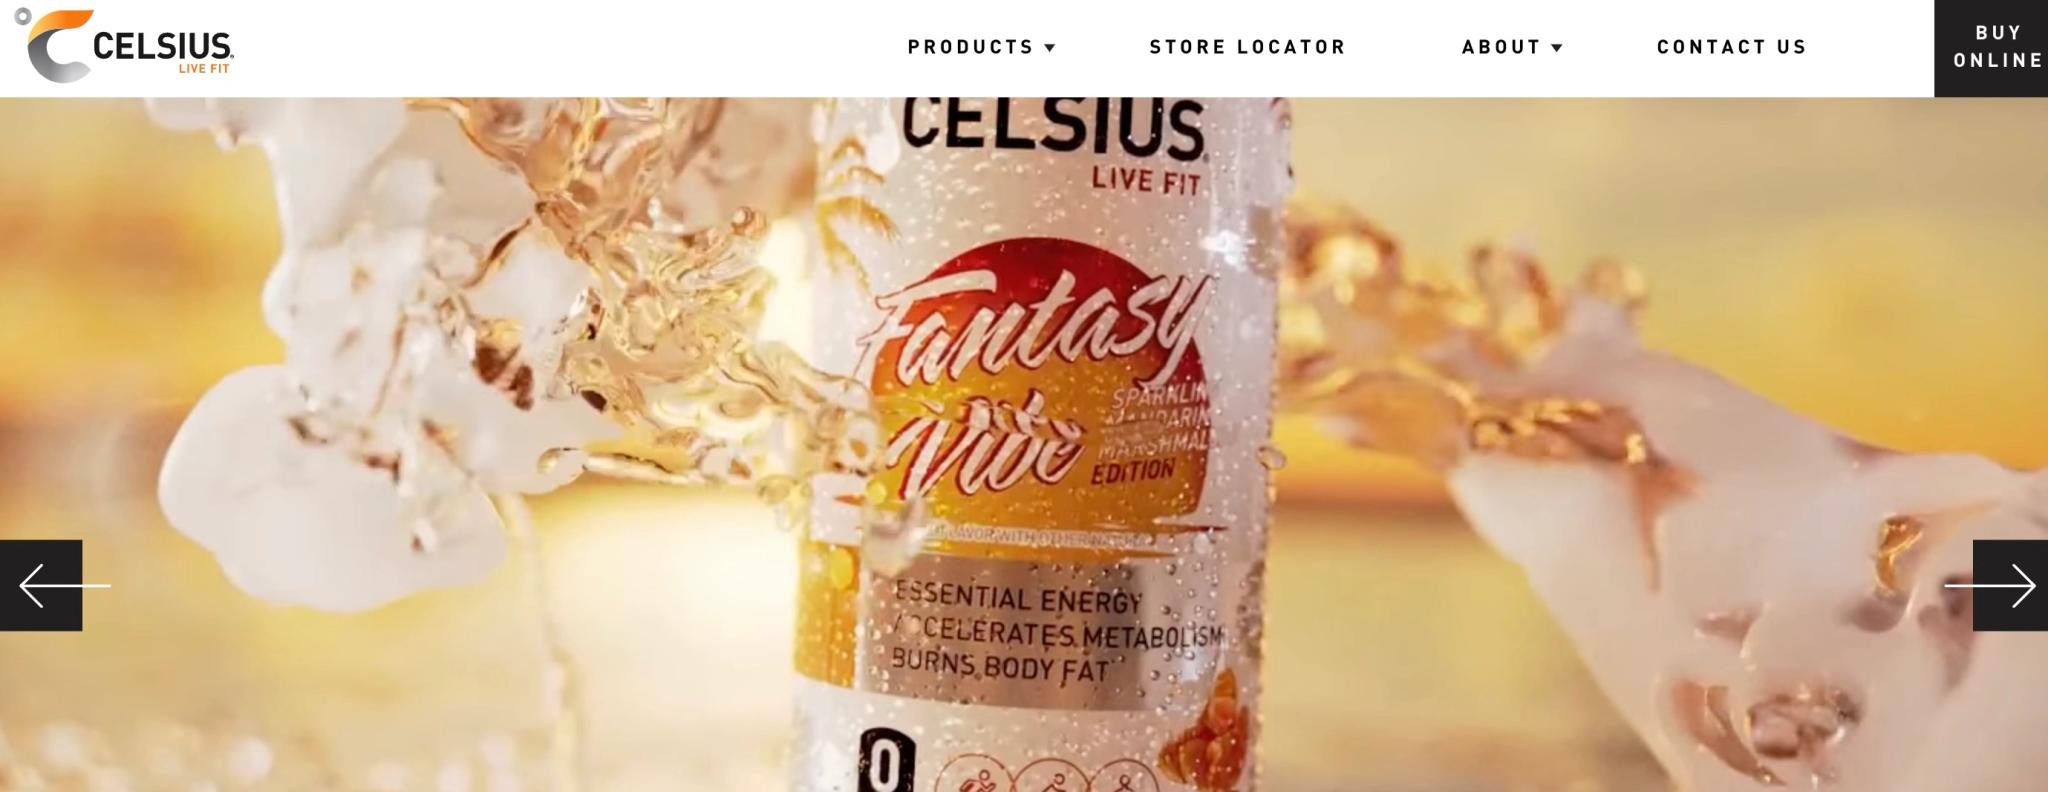 Screenshot of Celsius Website home page